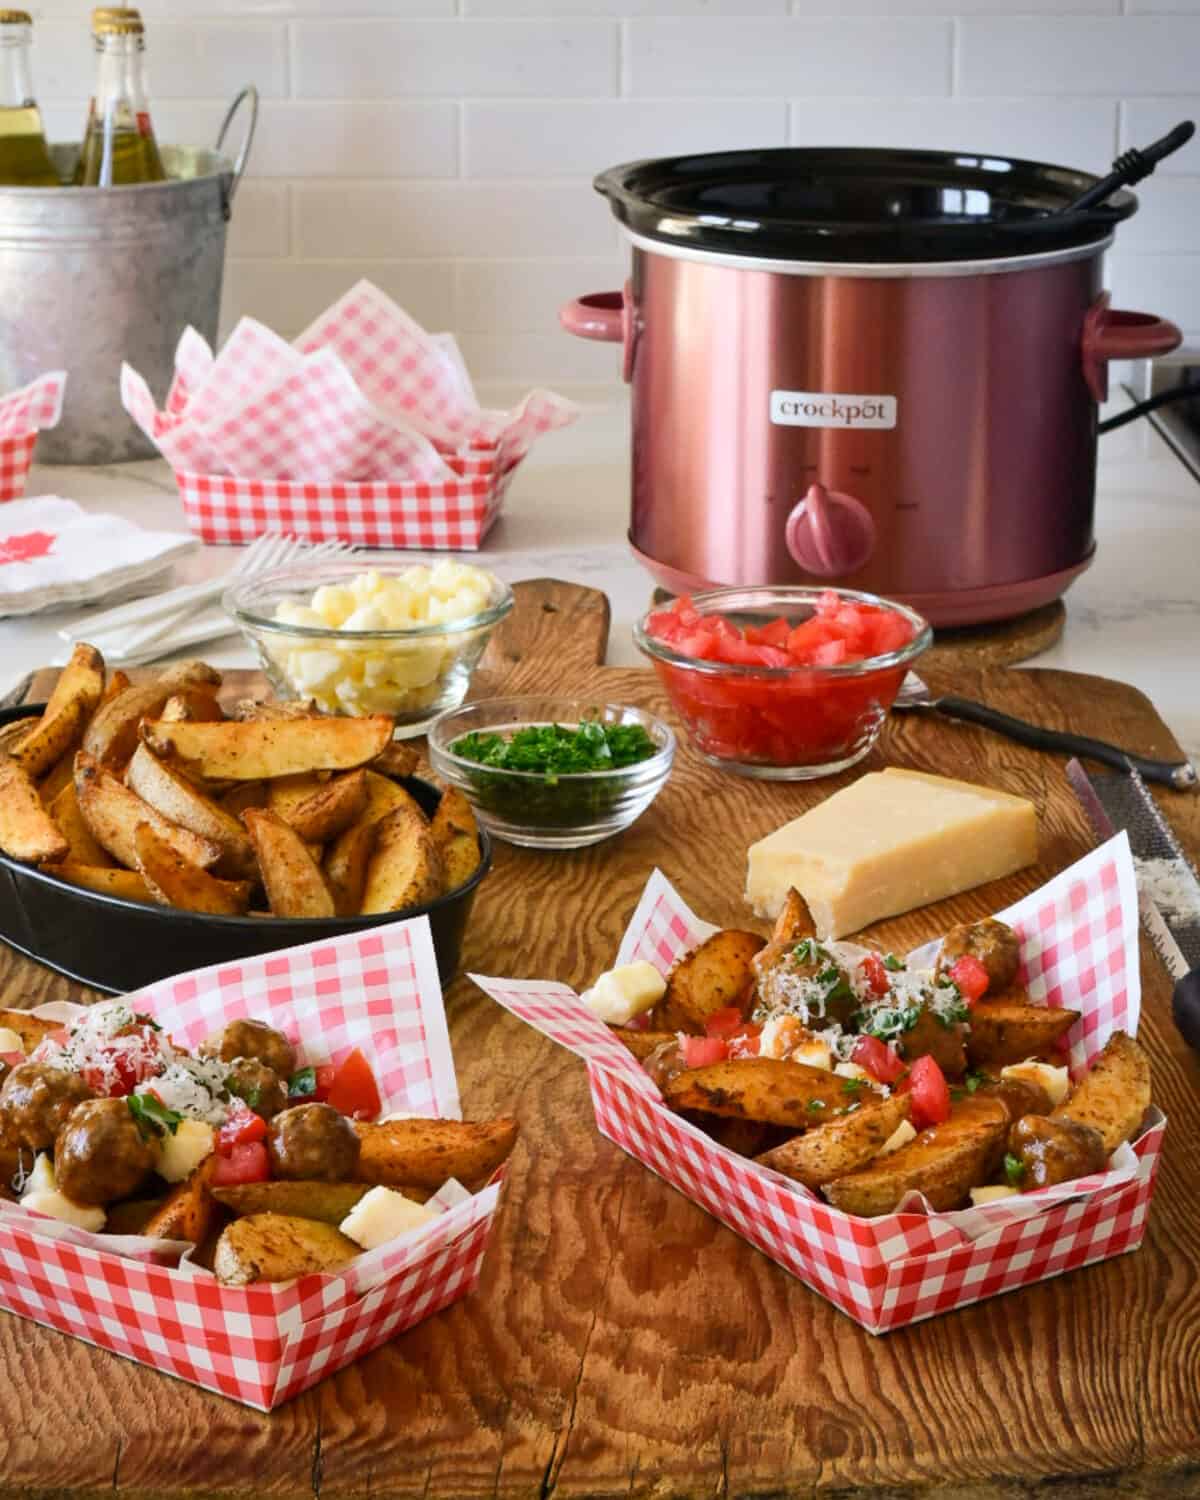 Two red and white check lined paper bowls are filled with poutine in the foreground. Potato wedges, poutine toppings and a copper slow cooker are in the background.